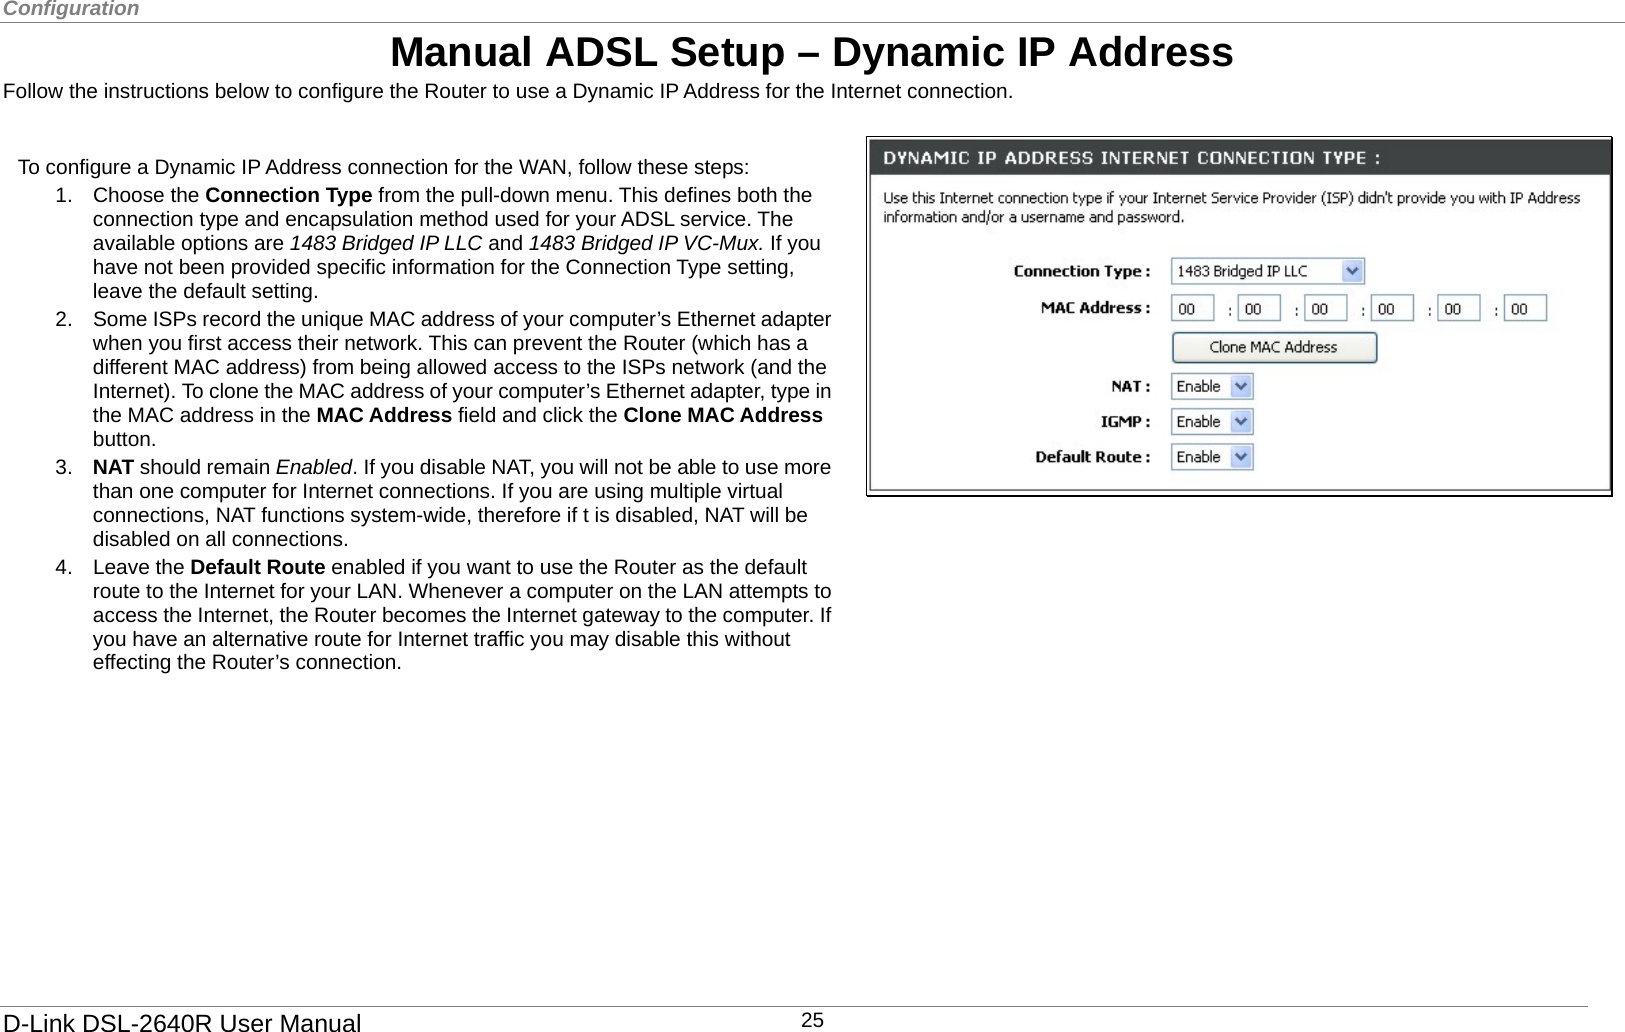 Configuration  Manual ADSL Setup – Dynamic IP Address Follow the instructions below to configure the Router to use a Dynamic IP Address for the Internet connection.   2.  Some ISPs record the unique MAC address of your computer’s Ethernet adapter when you first access their network. This can prevent the Router (which has a different MAC address) from being allowed access to the ISPs network (and the Internet). To clone the MAC address of your computer’s Ethernet adapter, type in the MAC address in the MAC Address field and click the Clone MAC Address button. 3.  NAT should remain Enabled. If you disable NAT, you will not be able to use more than one computer for Internet connections. If you are using multiple virtual connections, NAT functions system-wide, therefore if t is disabled, NAT will be disabled on all connections. 4. Leave the Default Route enabled if you want to use the Router as the default route to the Internet for your LAN. Whenever a computer on the LAN attempts toaccess the Internet, the Router becomes the Internet gateway to the computer. If you have an alternative route for Internet traffic you may disable this without effecting the Router’s connection.  To configure a Dynamic IP Address connection for the WAN, follow these steps: 1. Choose the Connection Type from the pull-down menu. This defines both the connection type and encapsulation method used for your ADSL service. The available options are 1483 Bridged IP LLC and 1483 Bridged IP VC-Mux. If you have not been provided specific information for the Connection Type setting, leave the default setting.         D-Link DSL-2640R User Manual 25